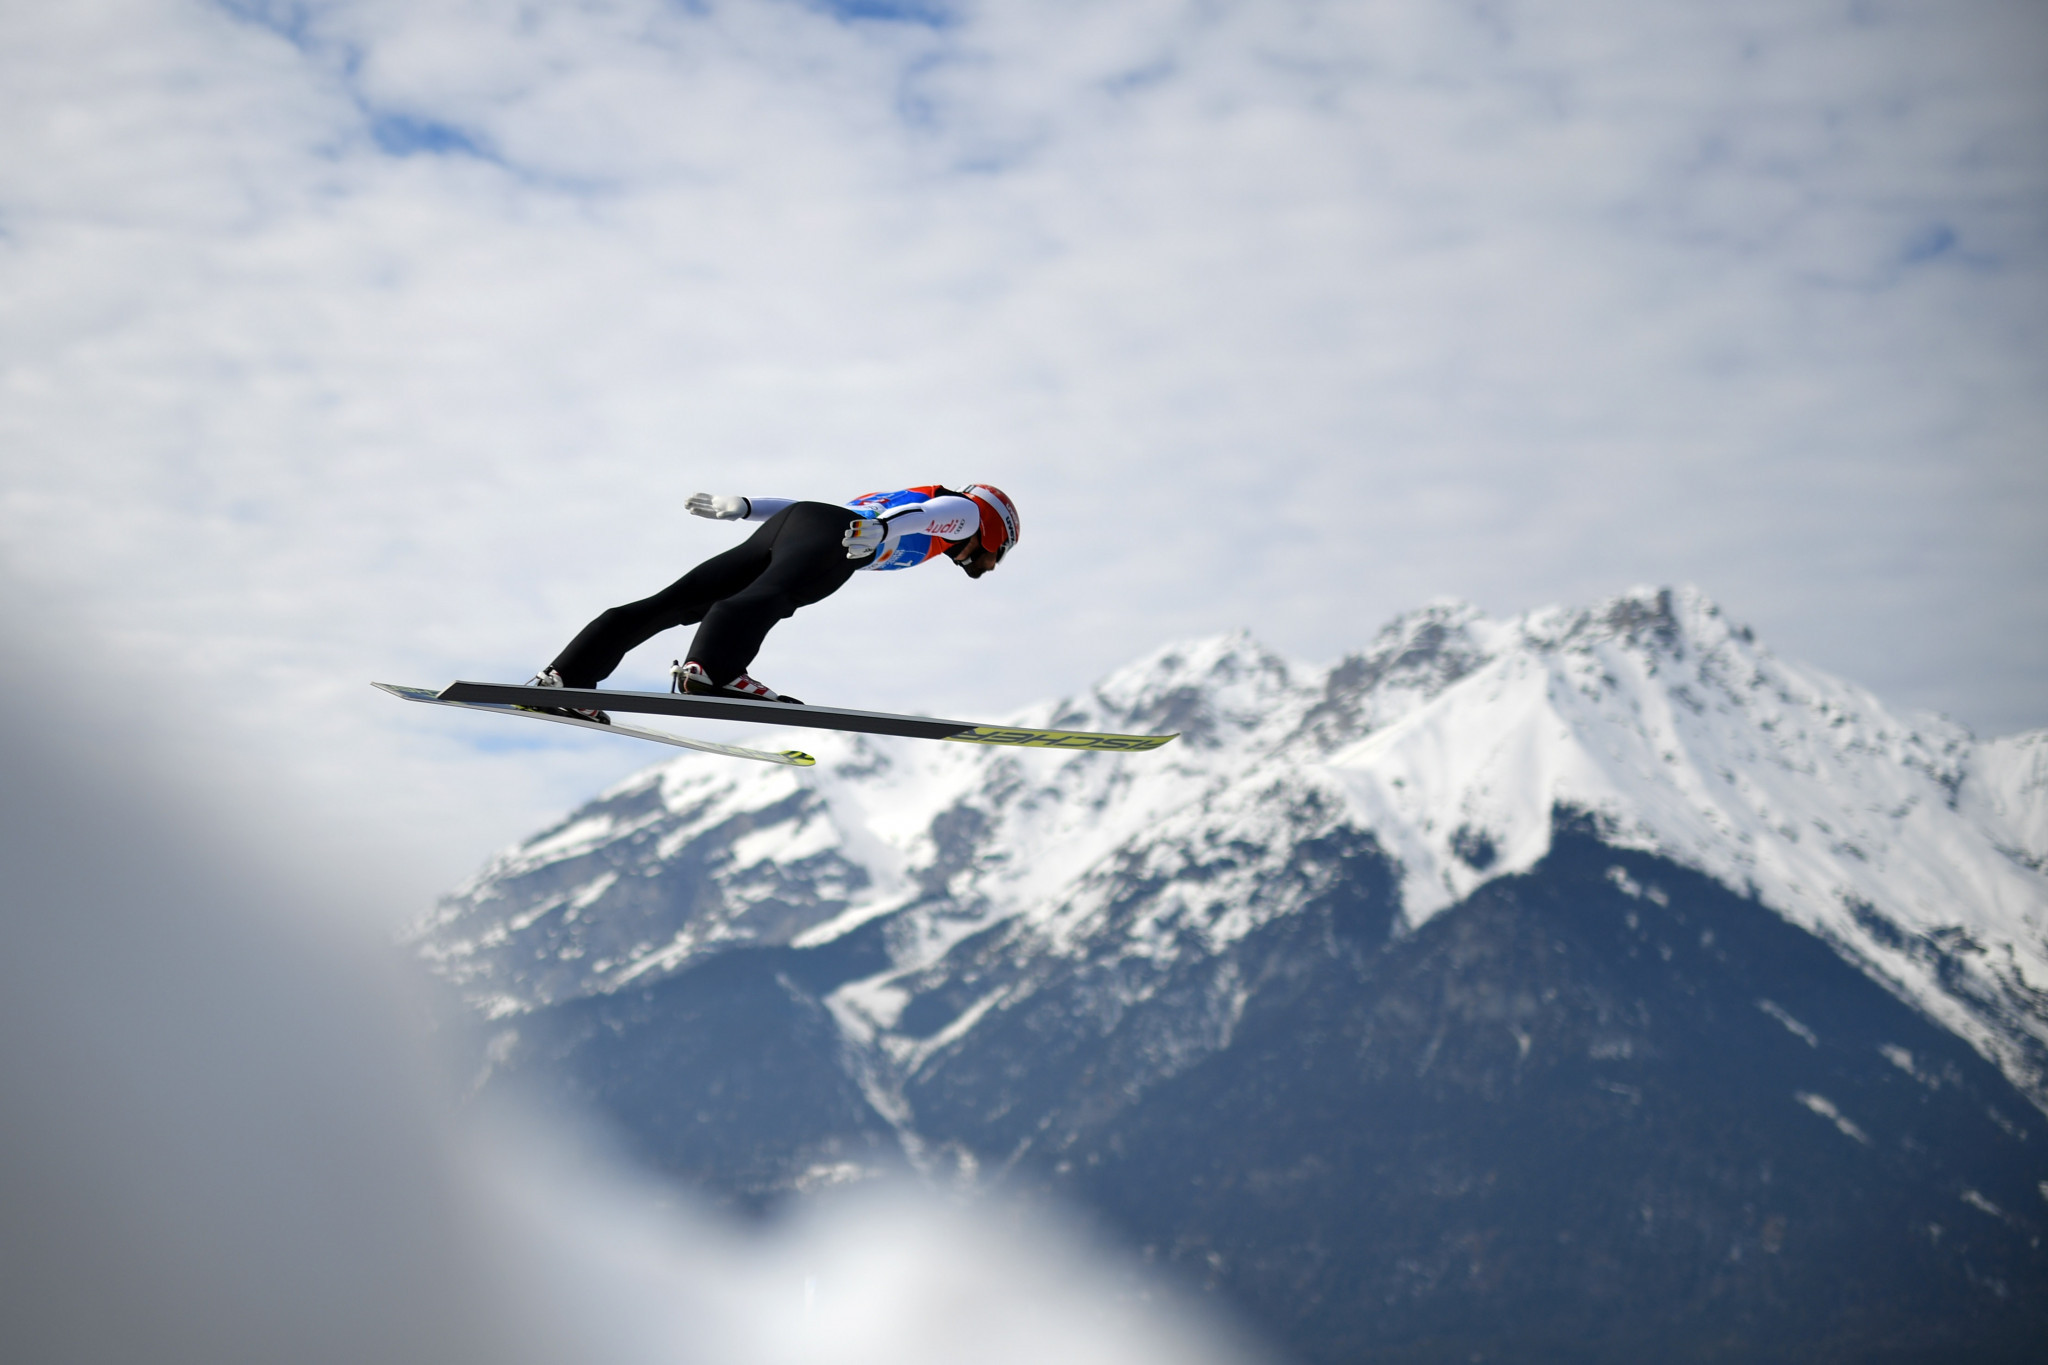 Newly crowned large hill world champion Markus Eisenbichler was in ski jumping action again ©Getty Images